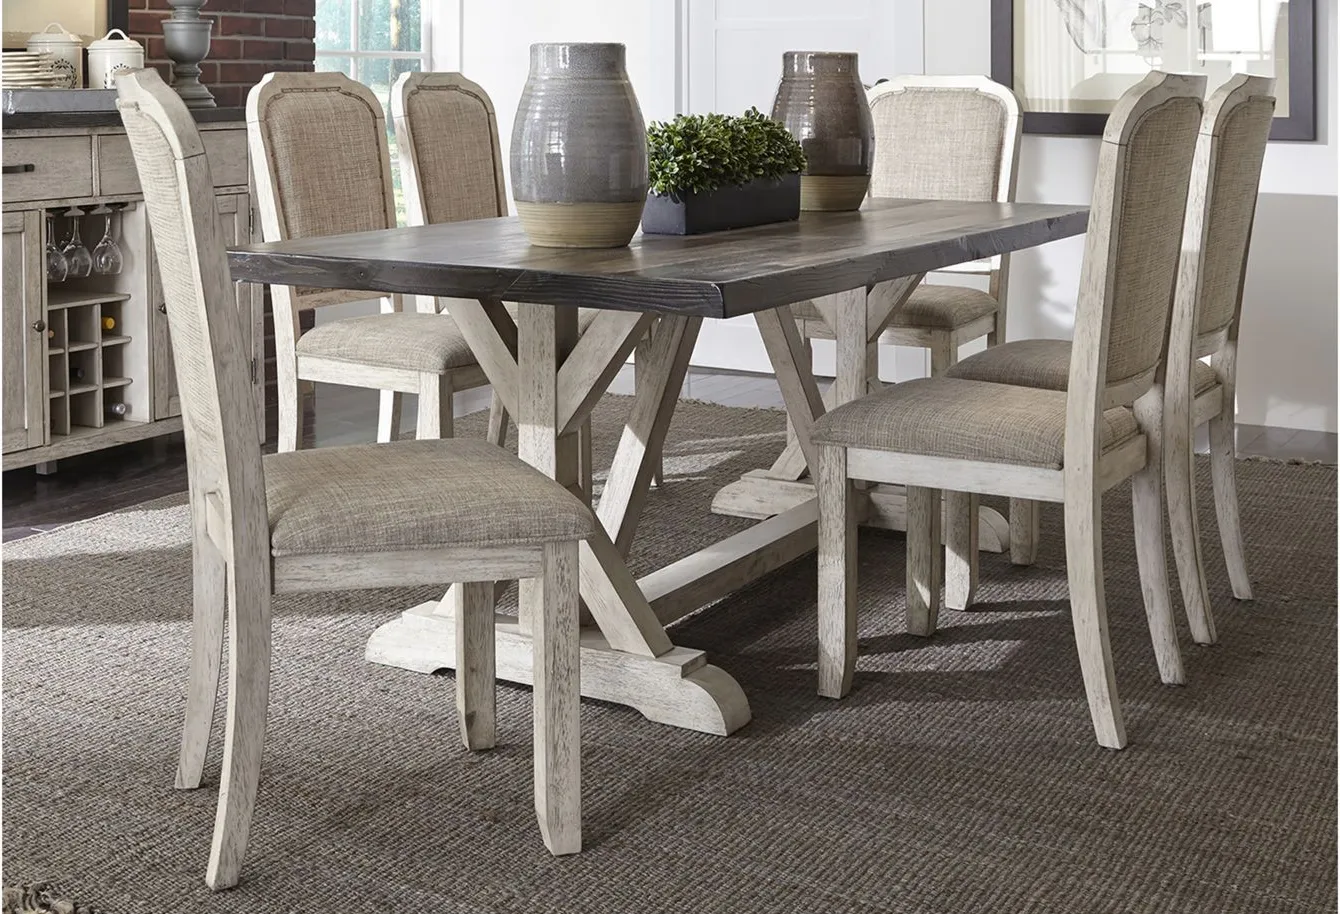 Willowrun 7-pc. Dining Set in Rustic White & Weathered Gray Top Finish by Liberty Furniture